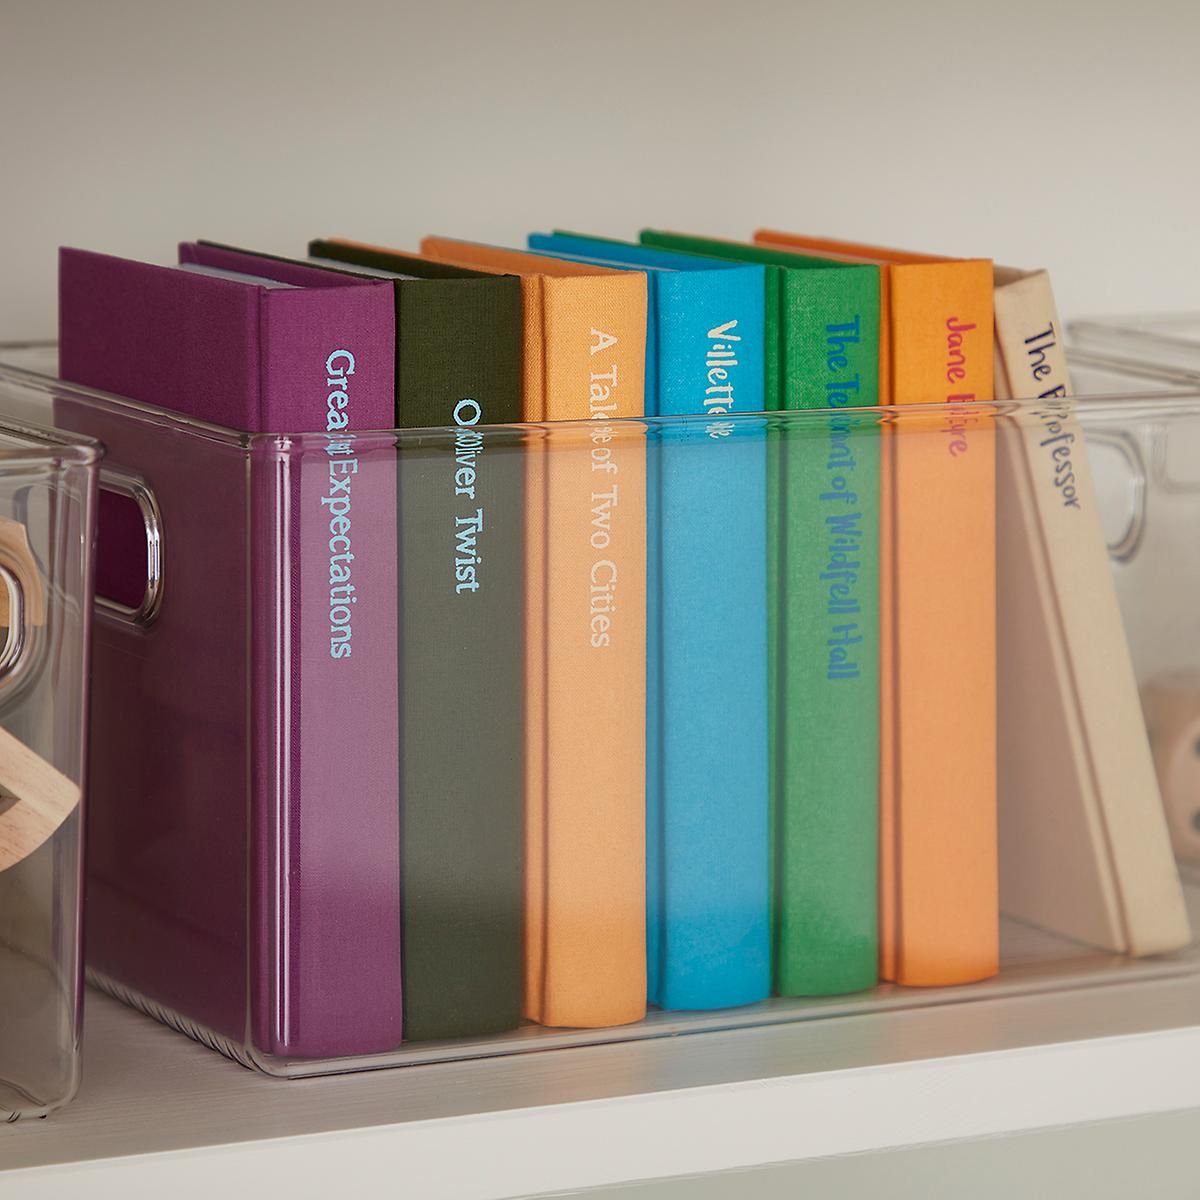 iDesign Linus Clear Storage Bins | The Container Store